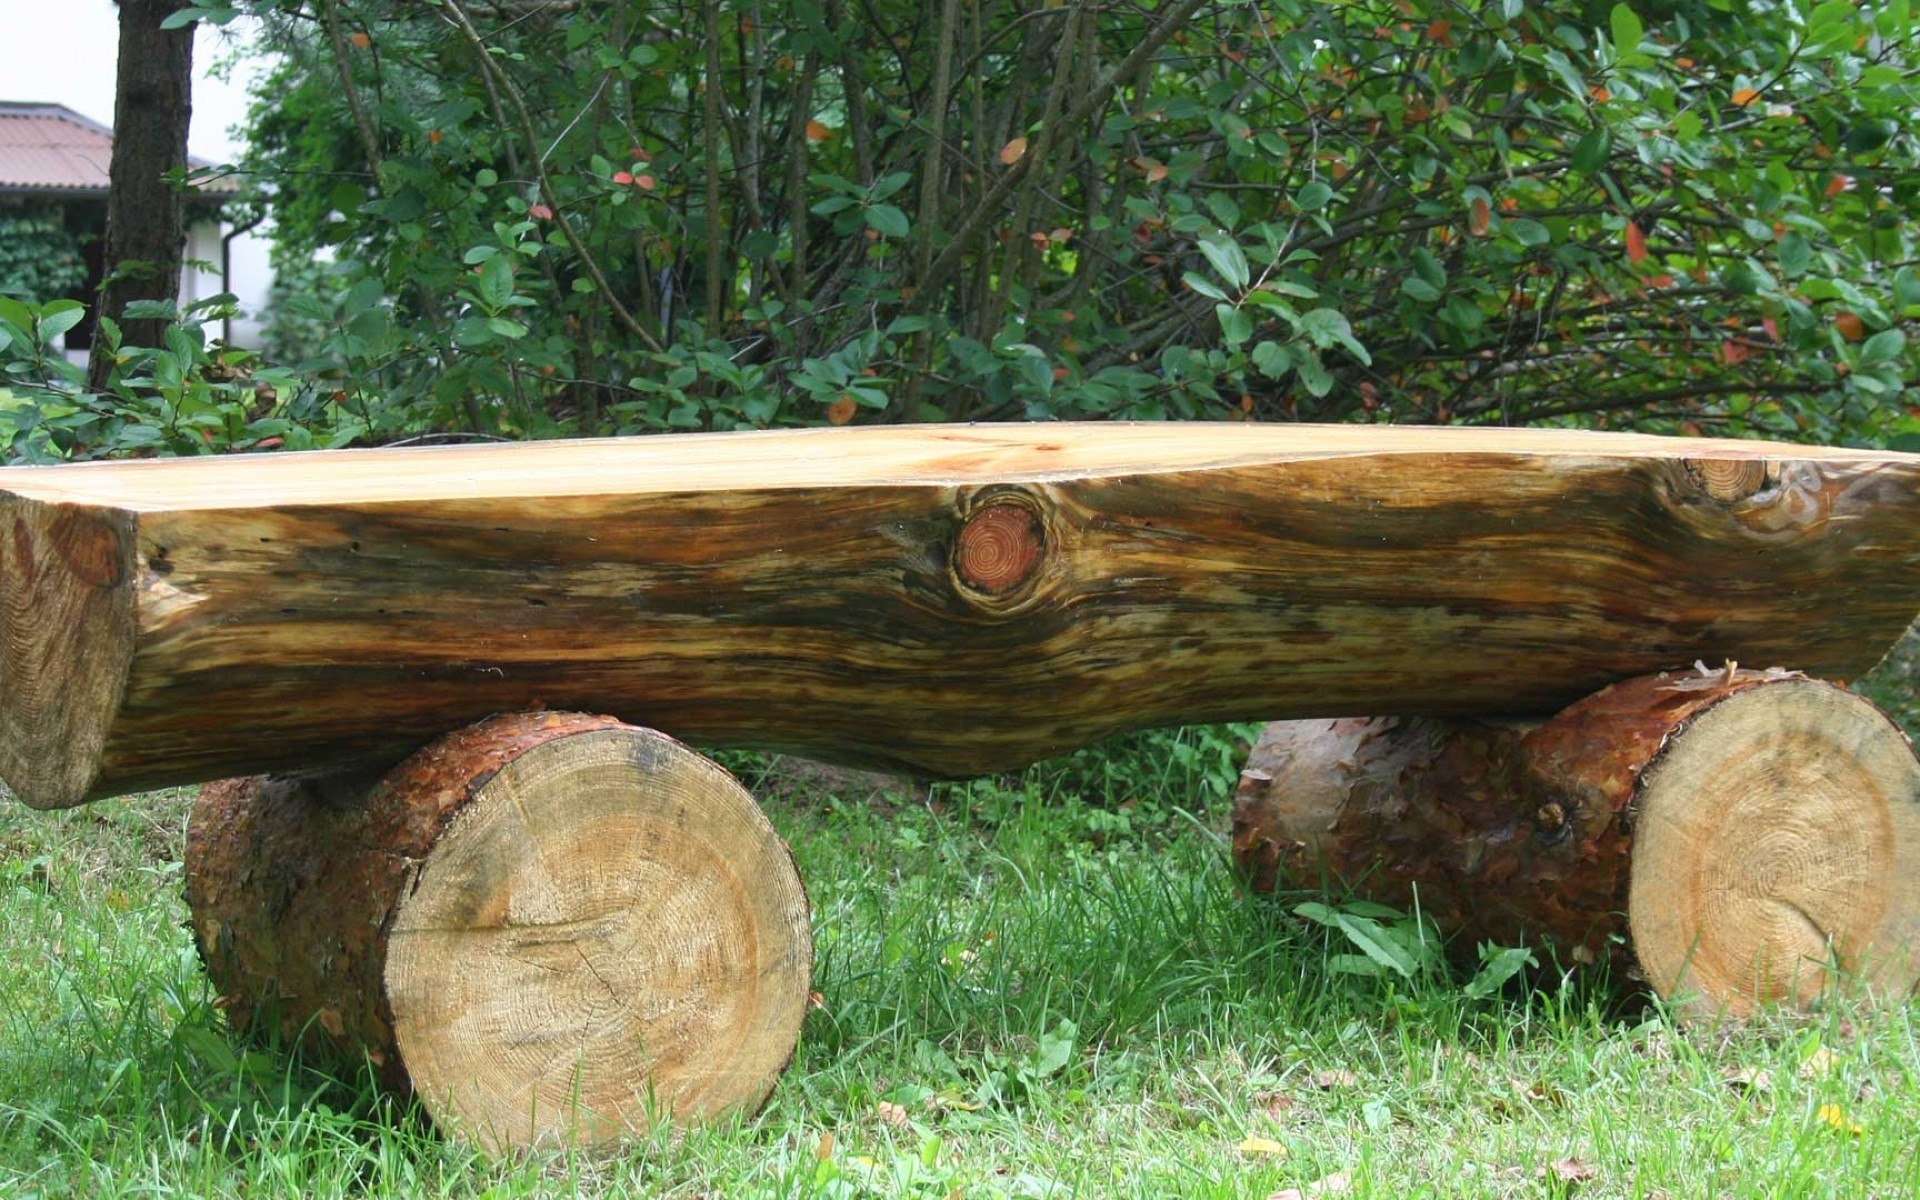 Do cut down to make log bench and other pieces